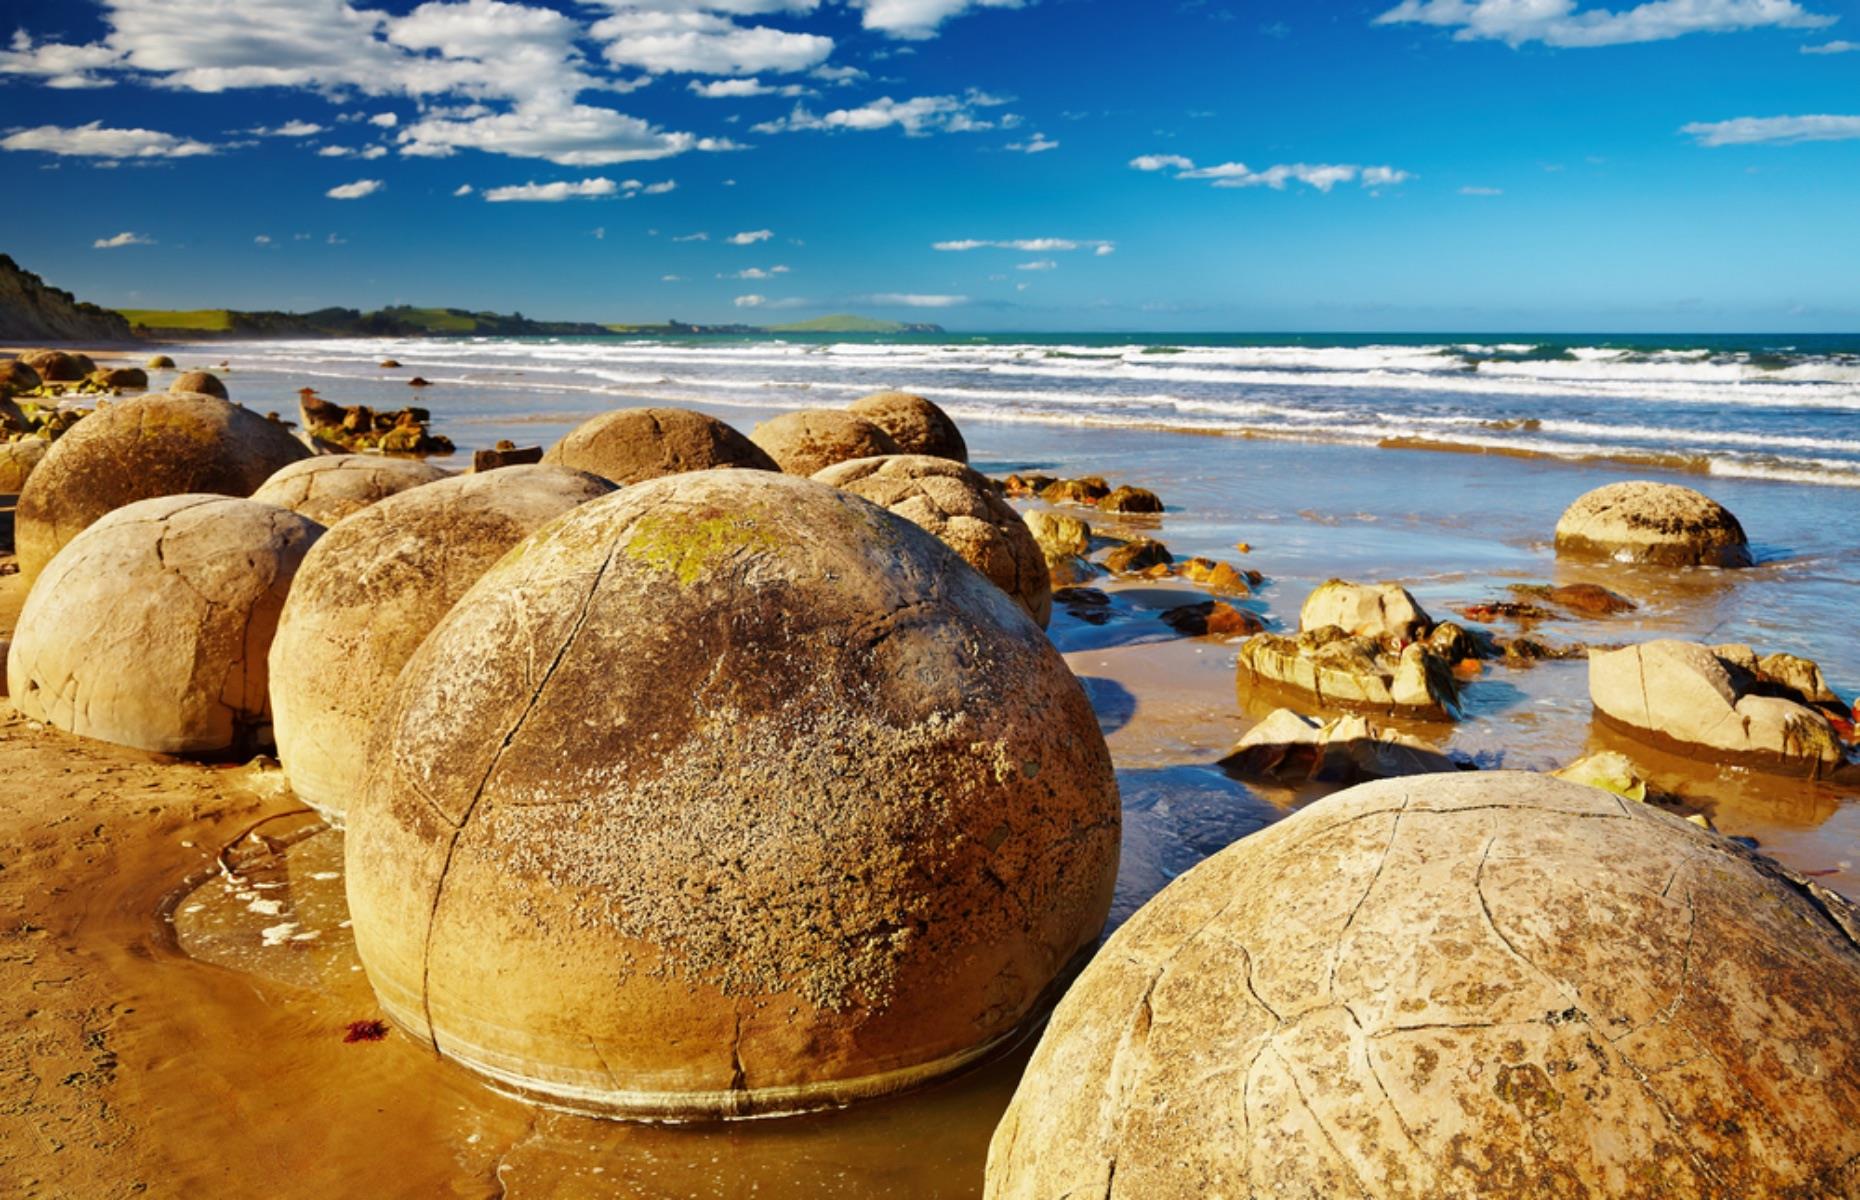 <p>These huge, bulbous anomalies scattering the sand of Koekohe Beach, between the towns of Moeraki and Hampden, add a different dimension to South Island’s scenic North Otago coast. Appearing like giant cannonballs up to 6.5 feet (2m) high, the geologic wonders look as though they were carved by human hands, but in fact they are made of calcified rock concreted together 65 million years ago and slowly released from the soft seabed by coastal erosion. Similar Koutu Boulders can be found around Hokianga Harbour on North Island.</p>